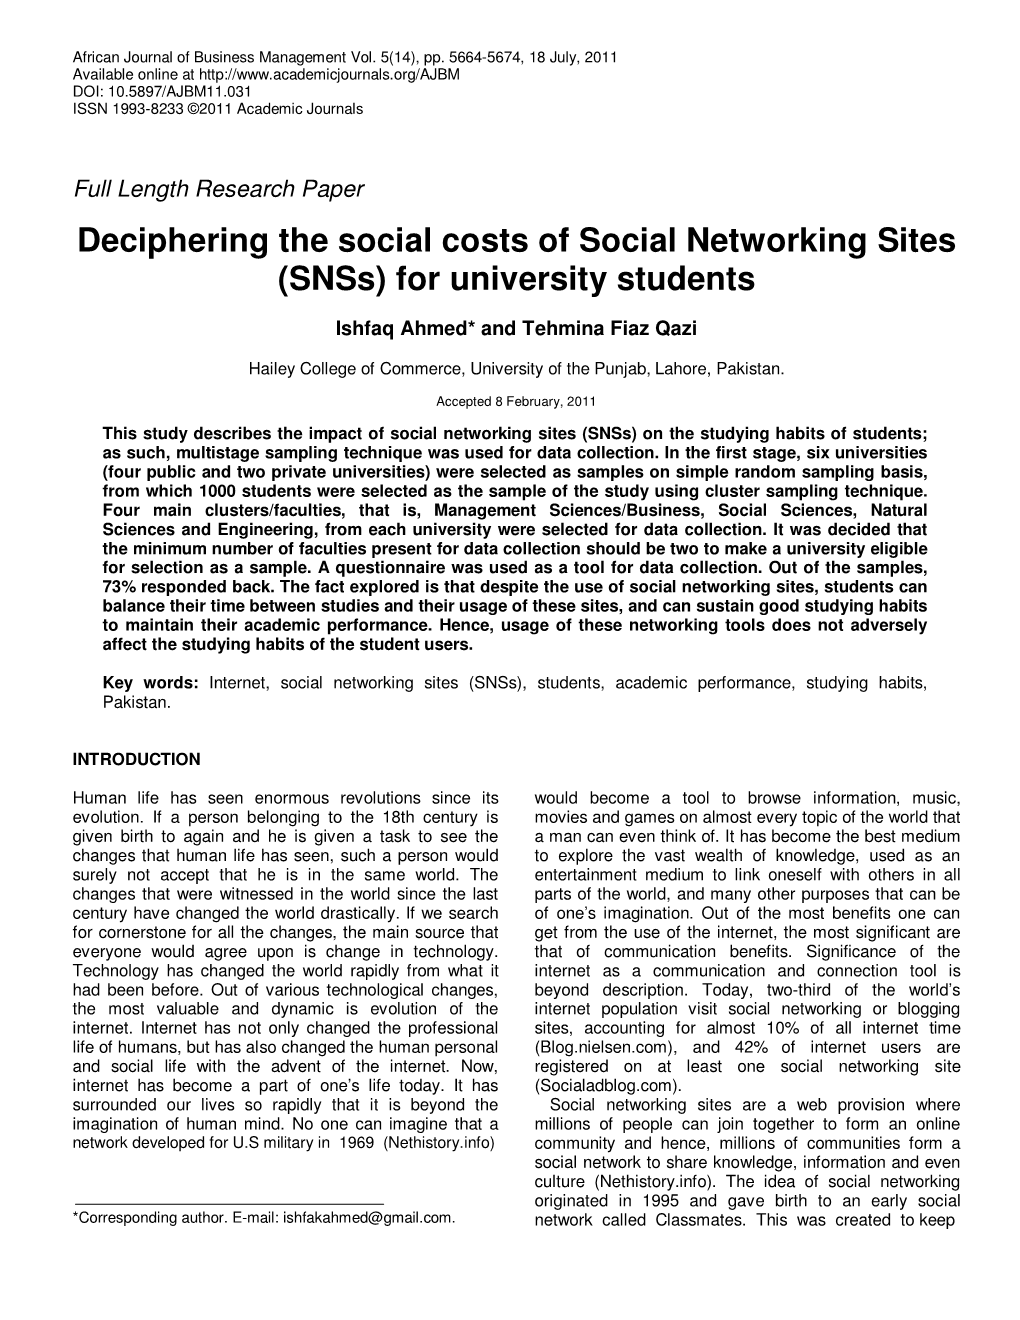 Deciphering the Social Costs of Social Networking Sites (Snss) for University Students